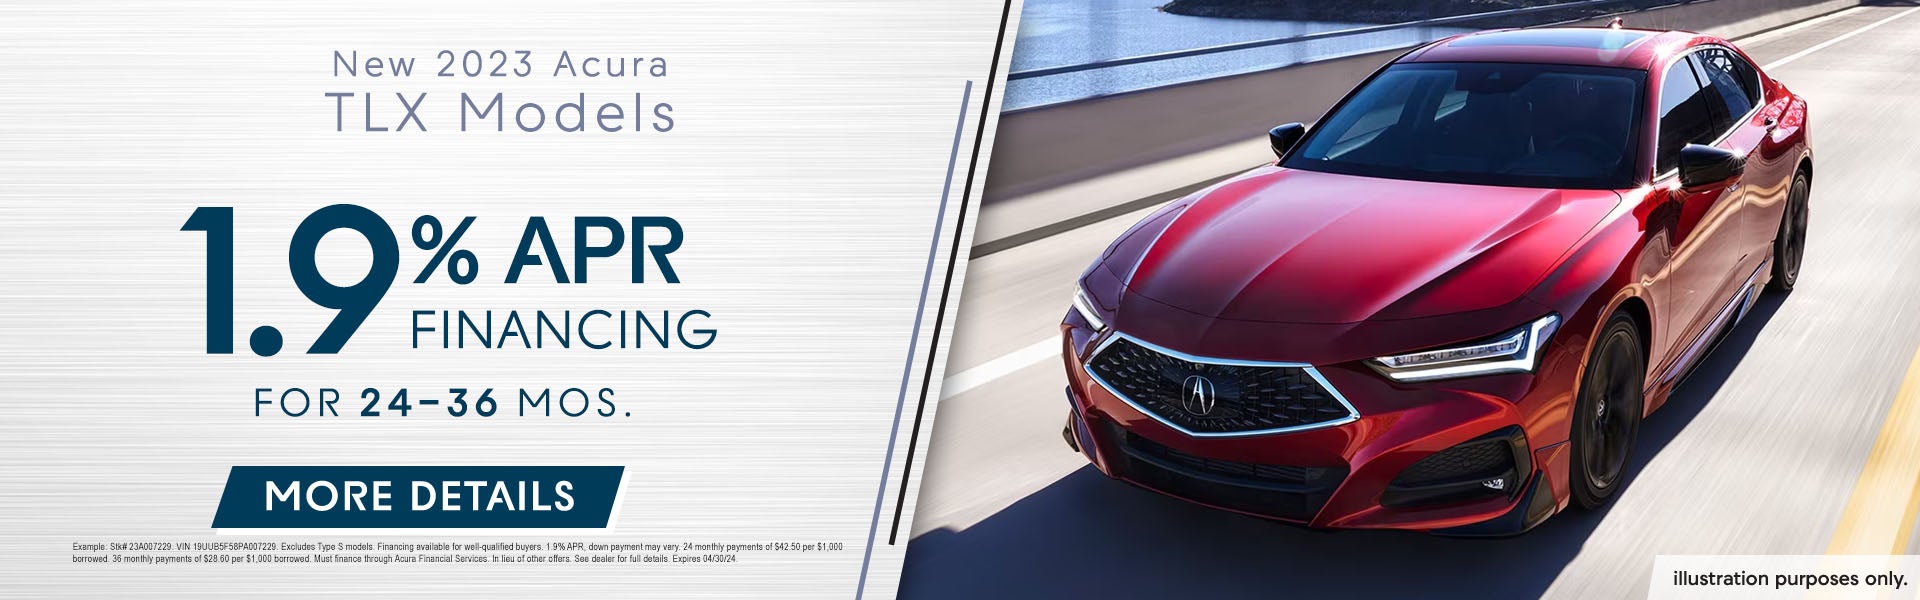 New 2023 Acura TLX Models